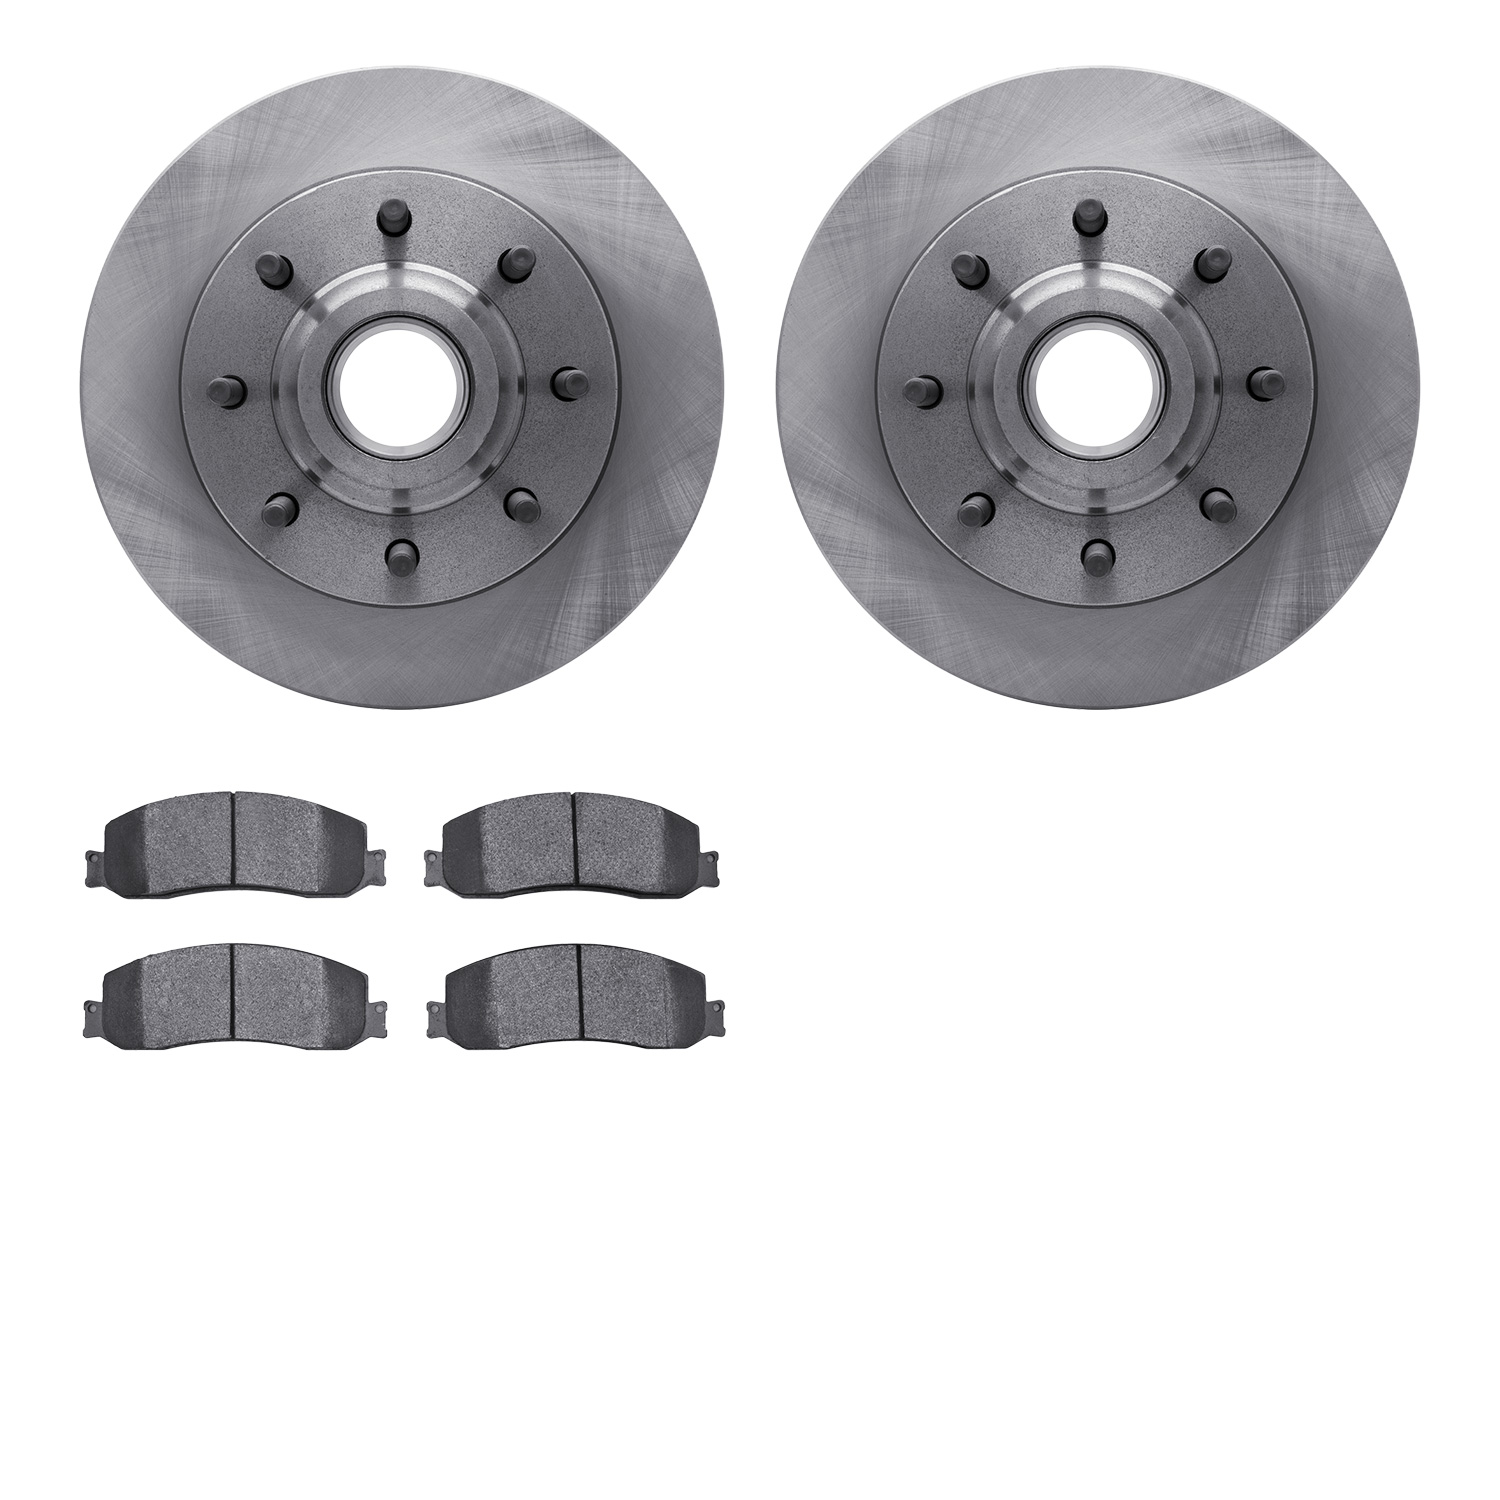 6402-54267 Brake Rotors with Ultimate-Duty Brake Pads, 2012-2012 Ford/Lincoln/Mercury/Mazda, Position: Front